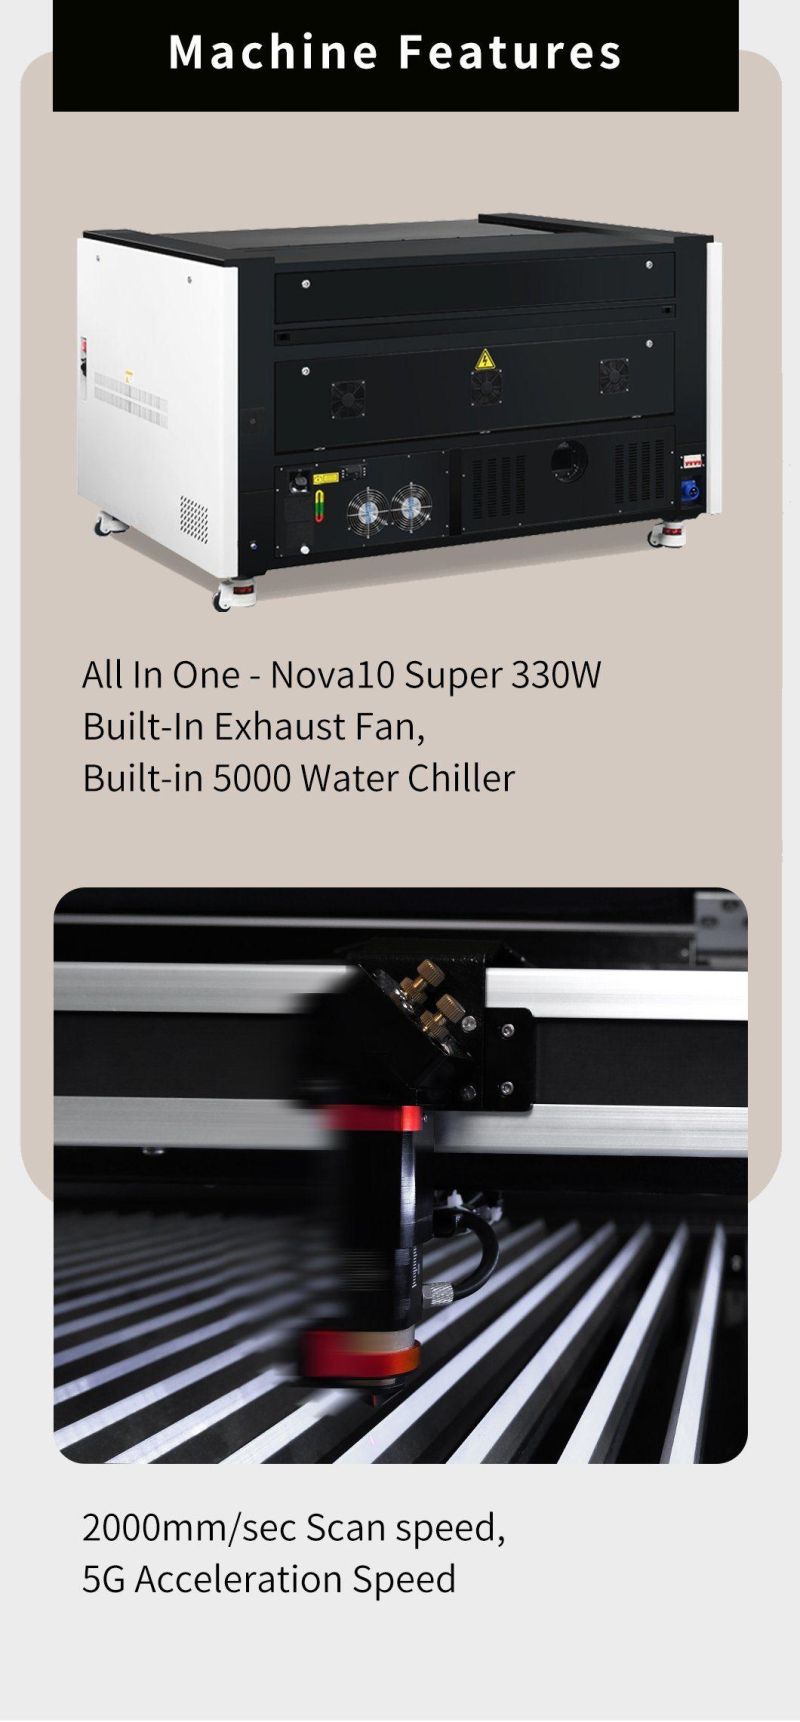 Newest 80W/100W CO2 Glass Tube +RF30W/60W Metal Tube Vector Engraving 1070 CO2 Laser Engraving Cutting Machine for Fabric/Textile/Woven Labels/Paper/Wood/Stone